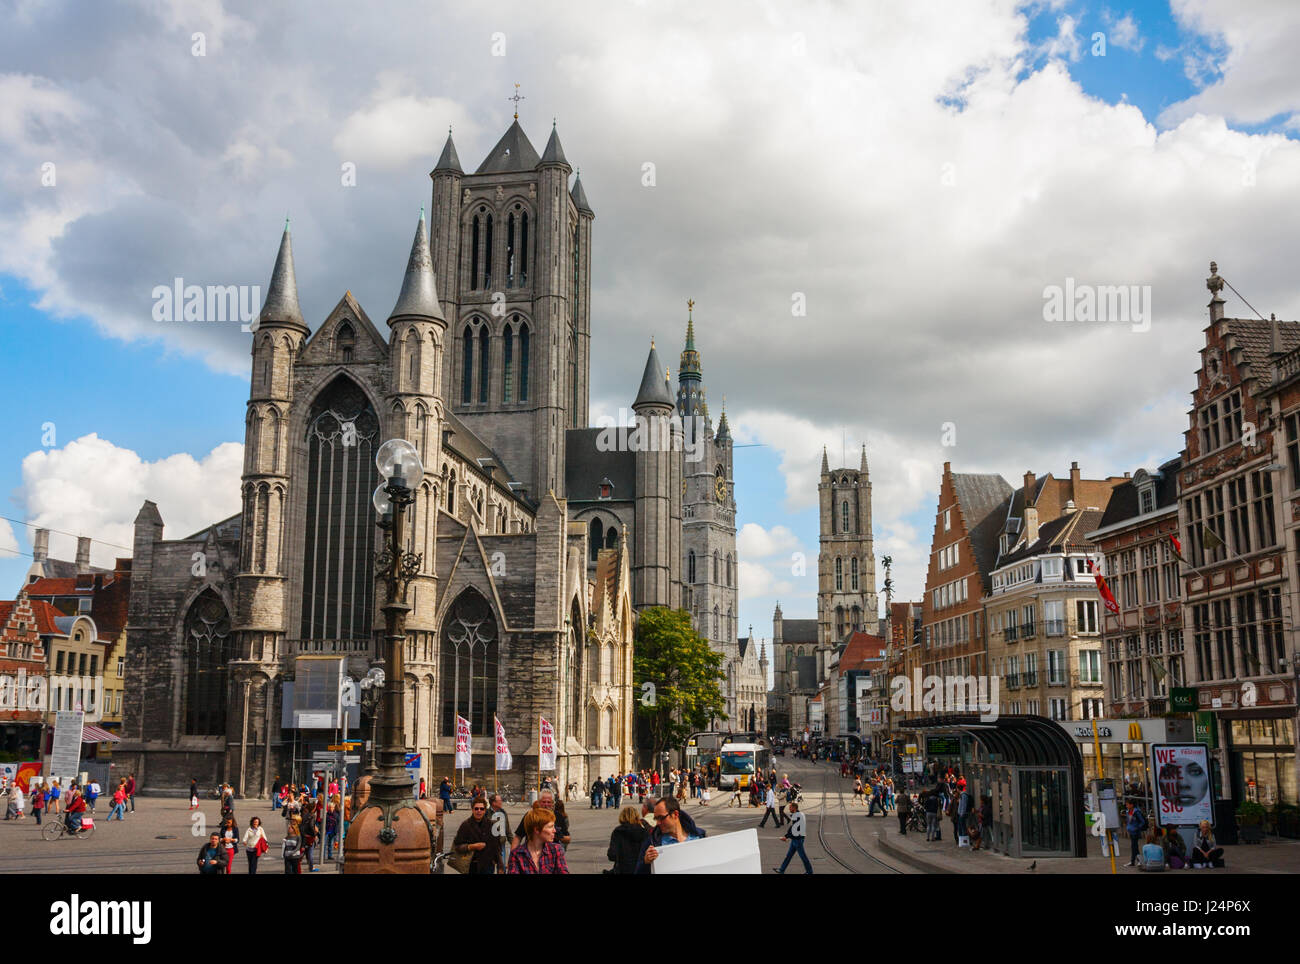 View of the old Ghent city centre with the Cataloniestraat, Saint-Nicholas Church, Belfry and the Saint Bavo Cathedral under a cloudy sky. Belgium. Stock Photo